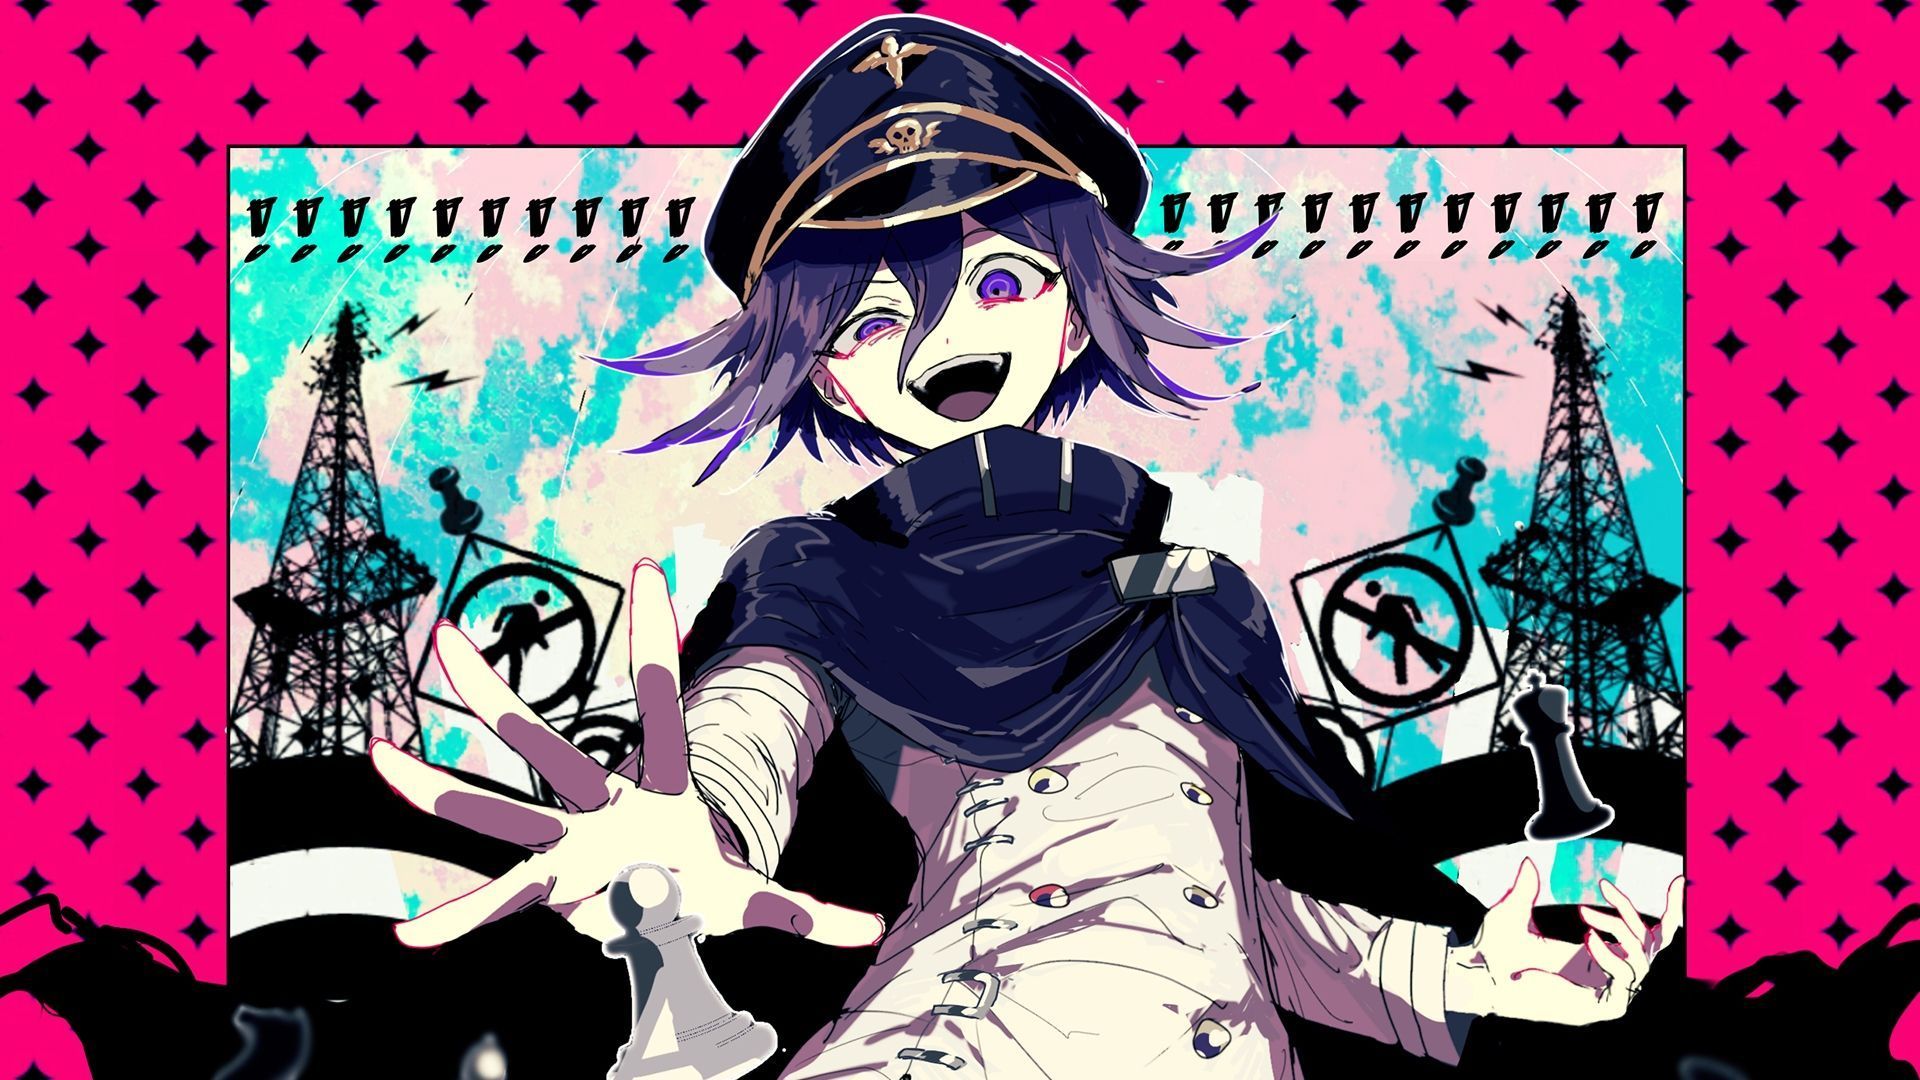 Anime wallpaper with anime characters in the background - Danganronpa